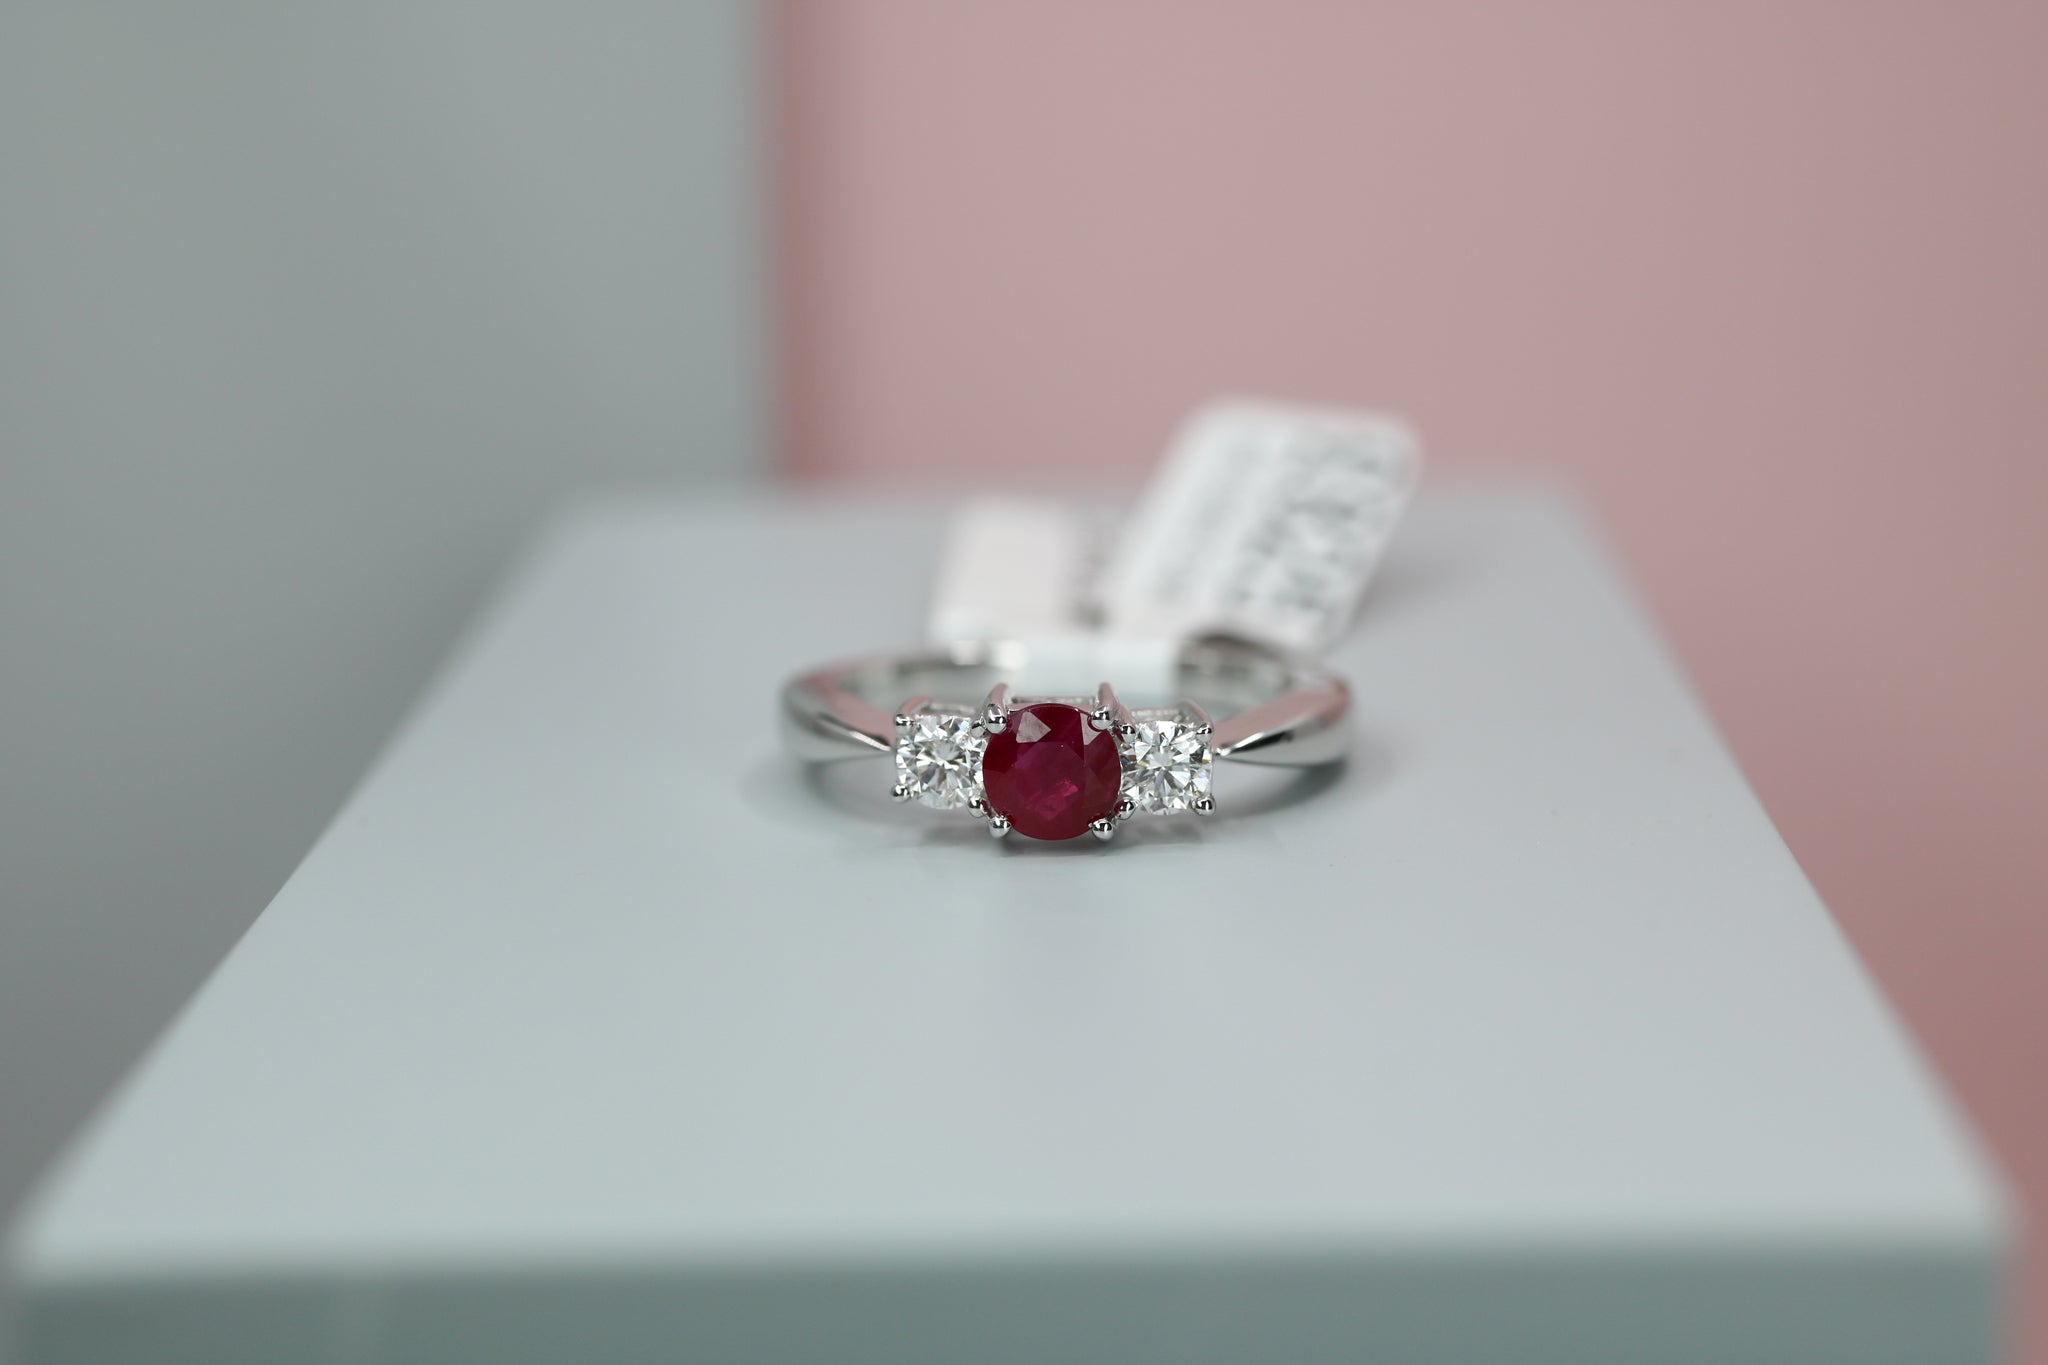 9ct White Gold Ruby & Diamond Ring 0.25ct - HJ2065 - Hallmark Jewellers Formby & The Jewellers Bench Widnes